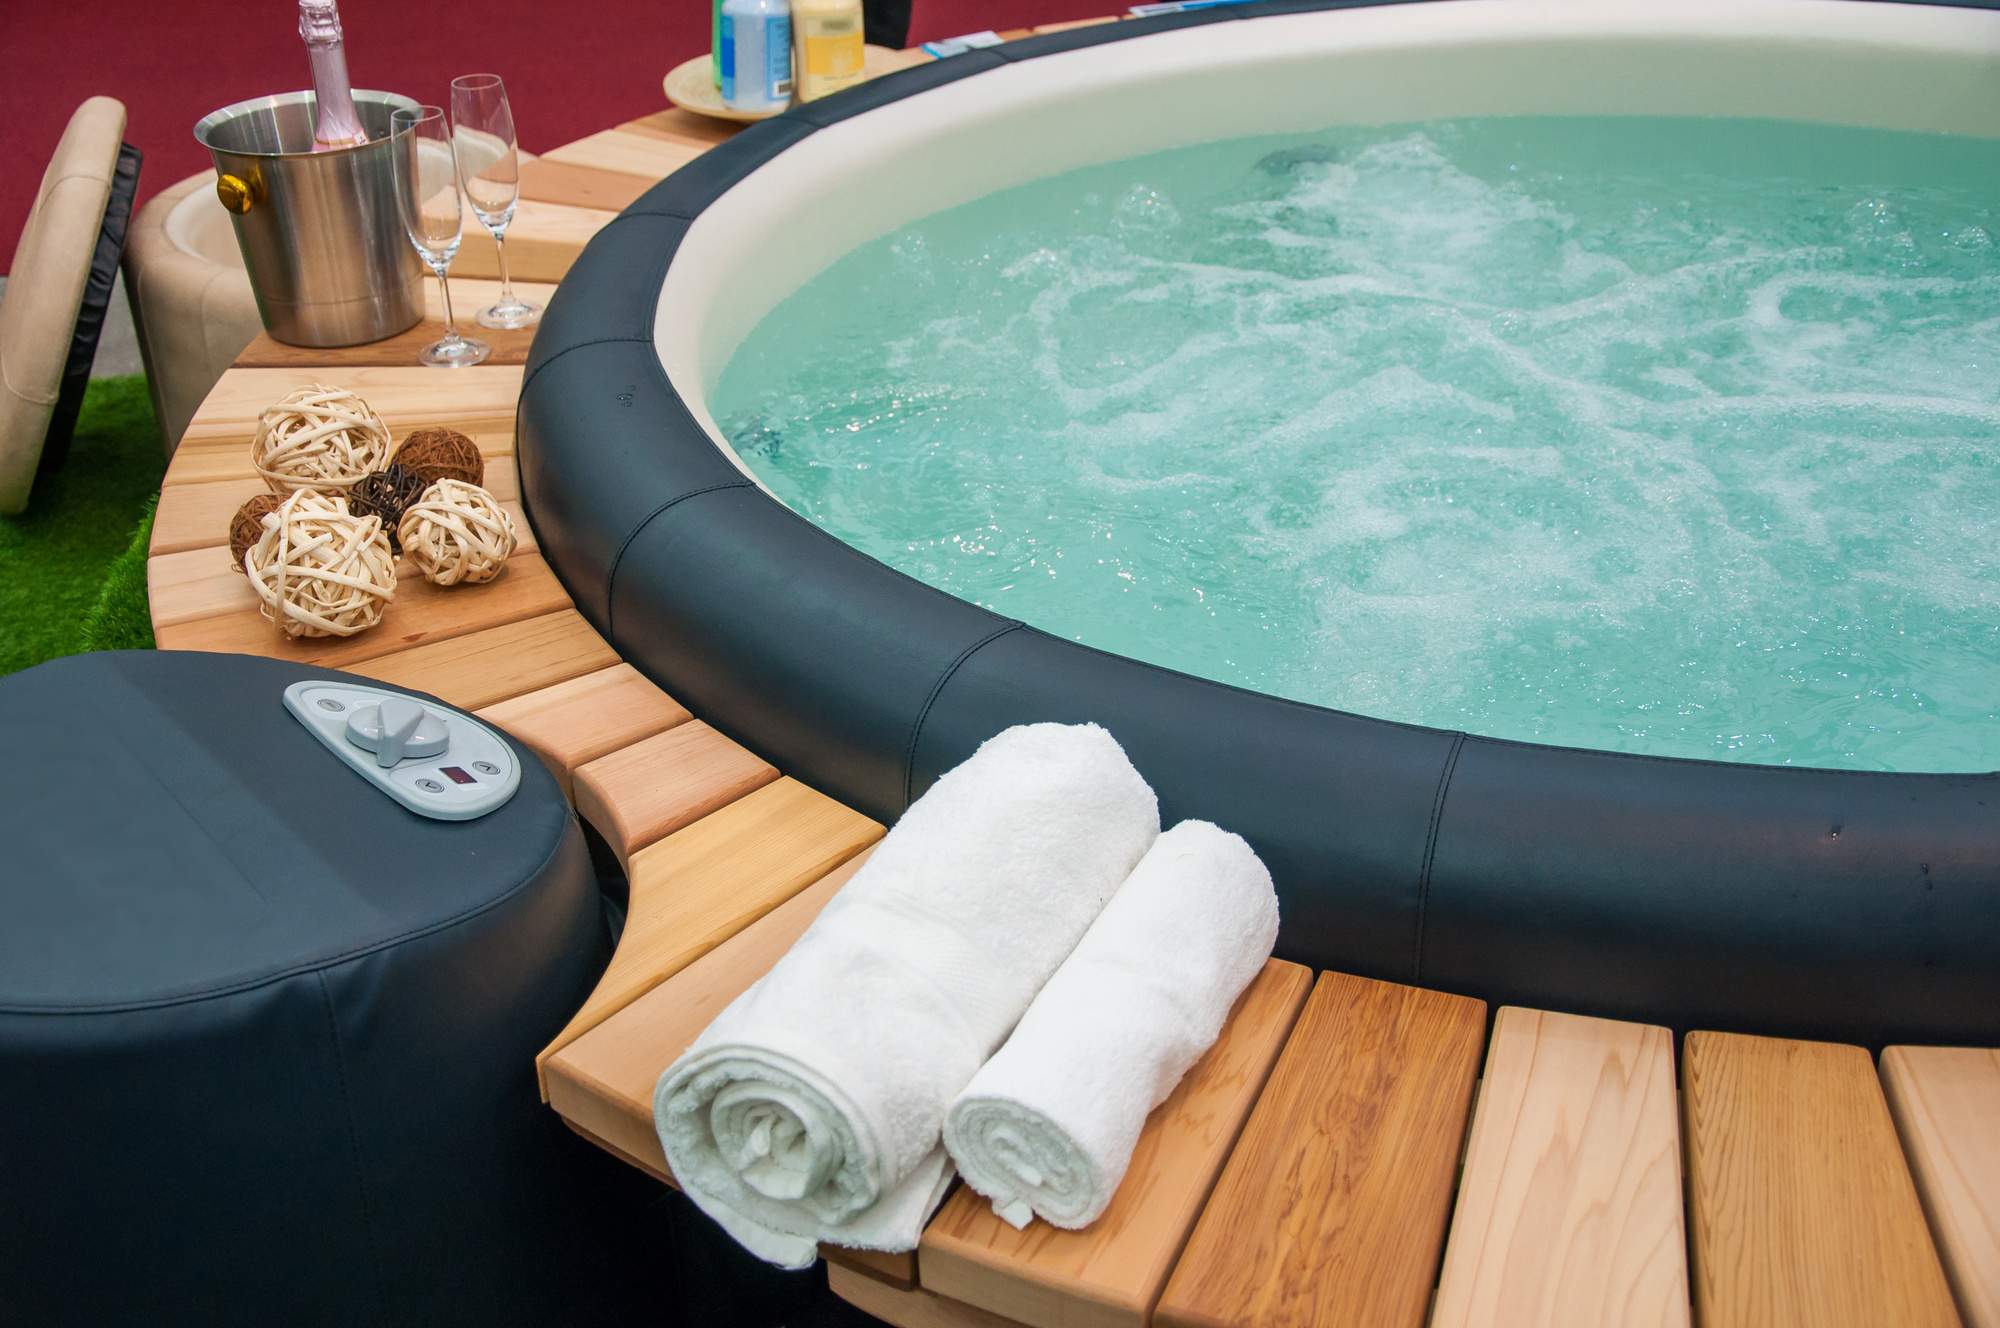 Reasons Why You Should Hire a Professional Electrician to Wire Your Hot Tub